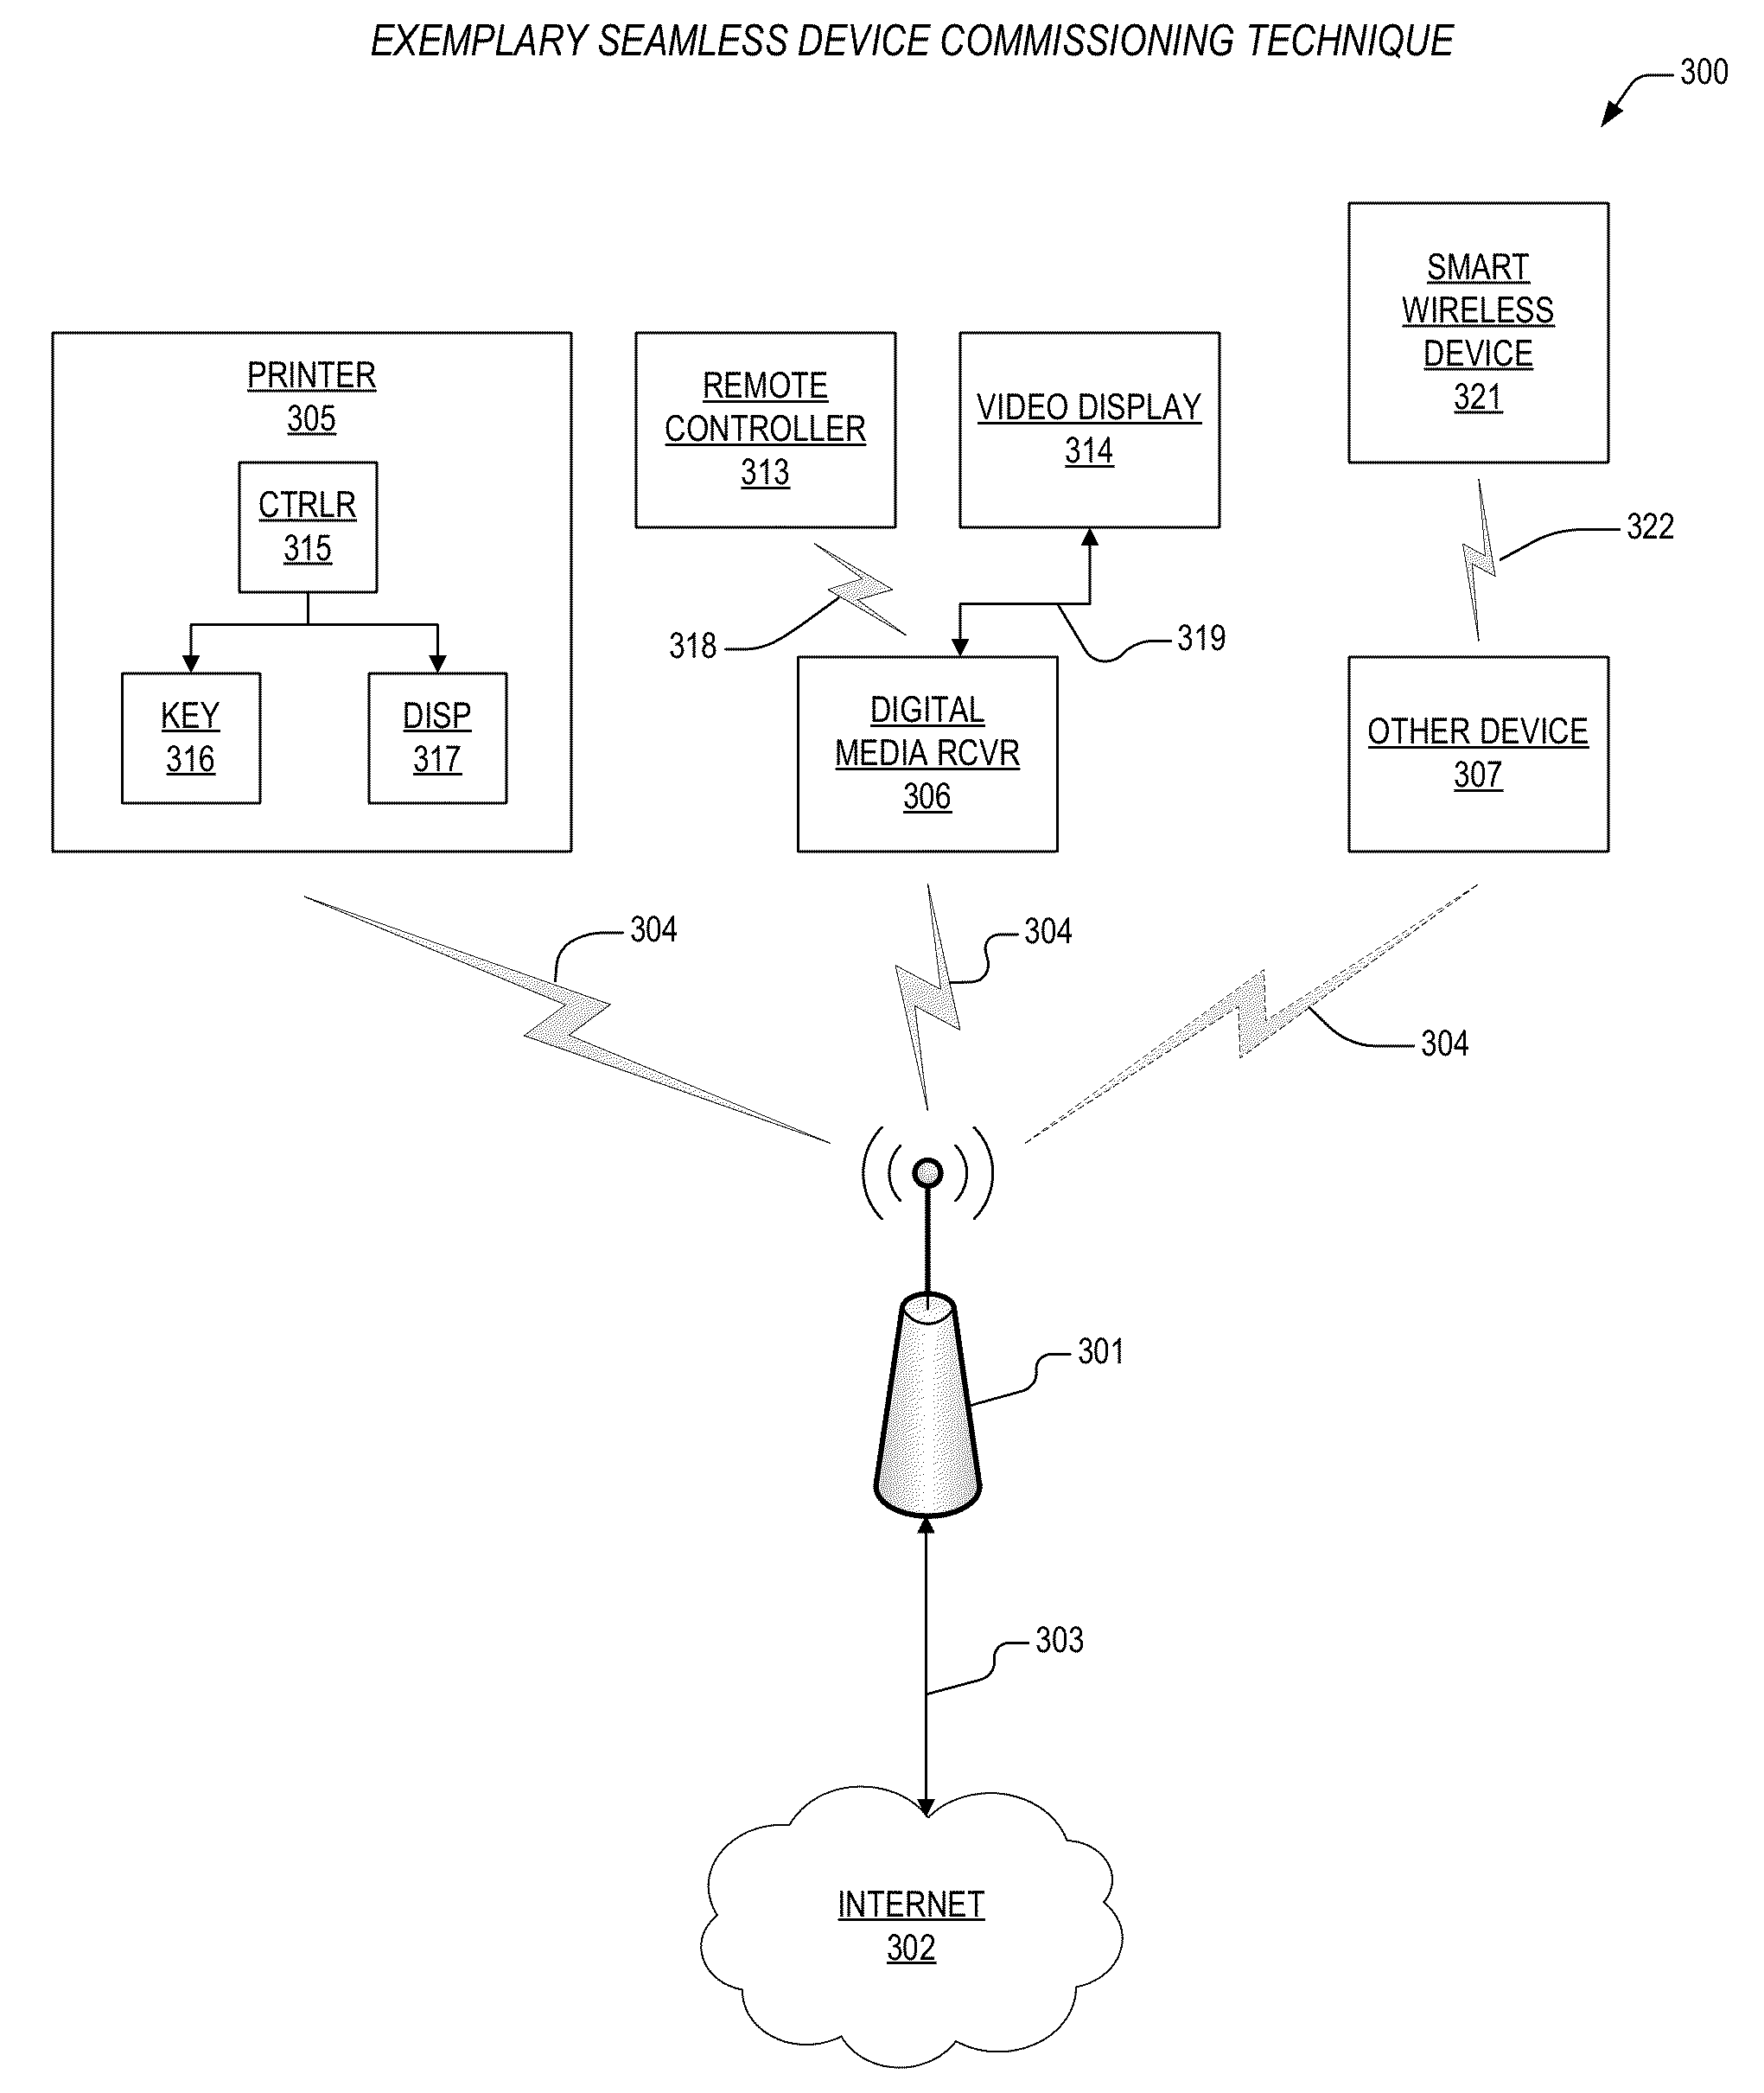 Apparatus and method for seamless commissioning of wireless devices